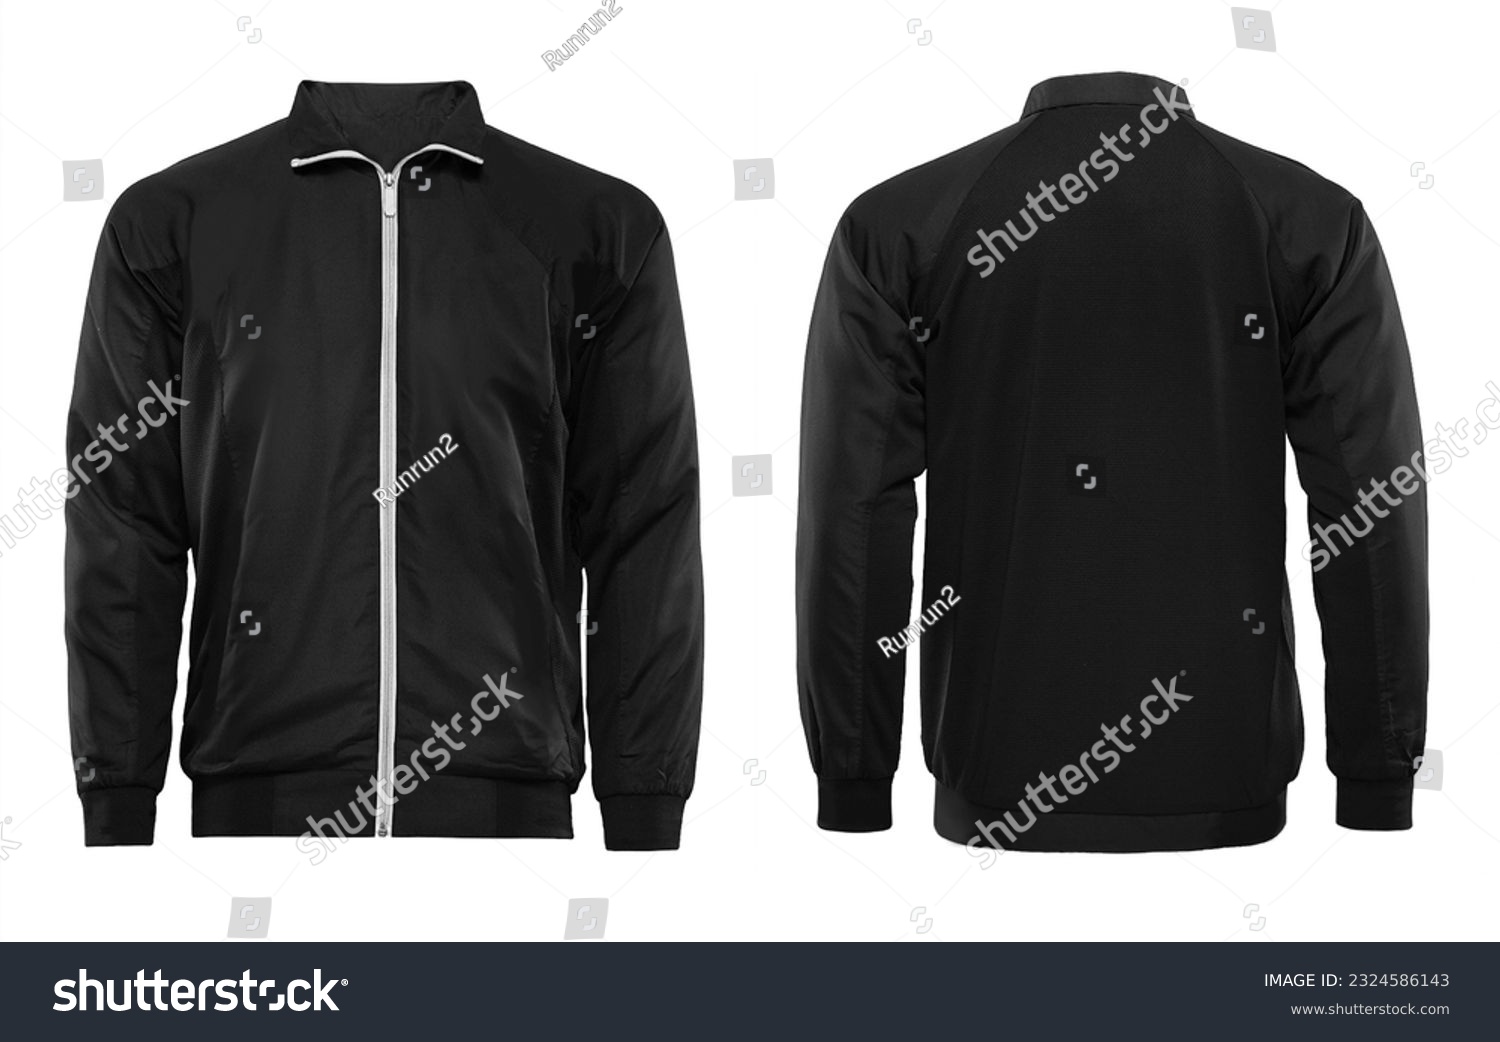 Blank black color jacket in front and back view, isolated on white background.  #2324586143